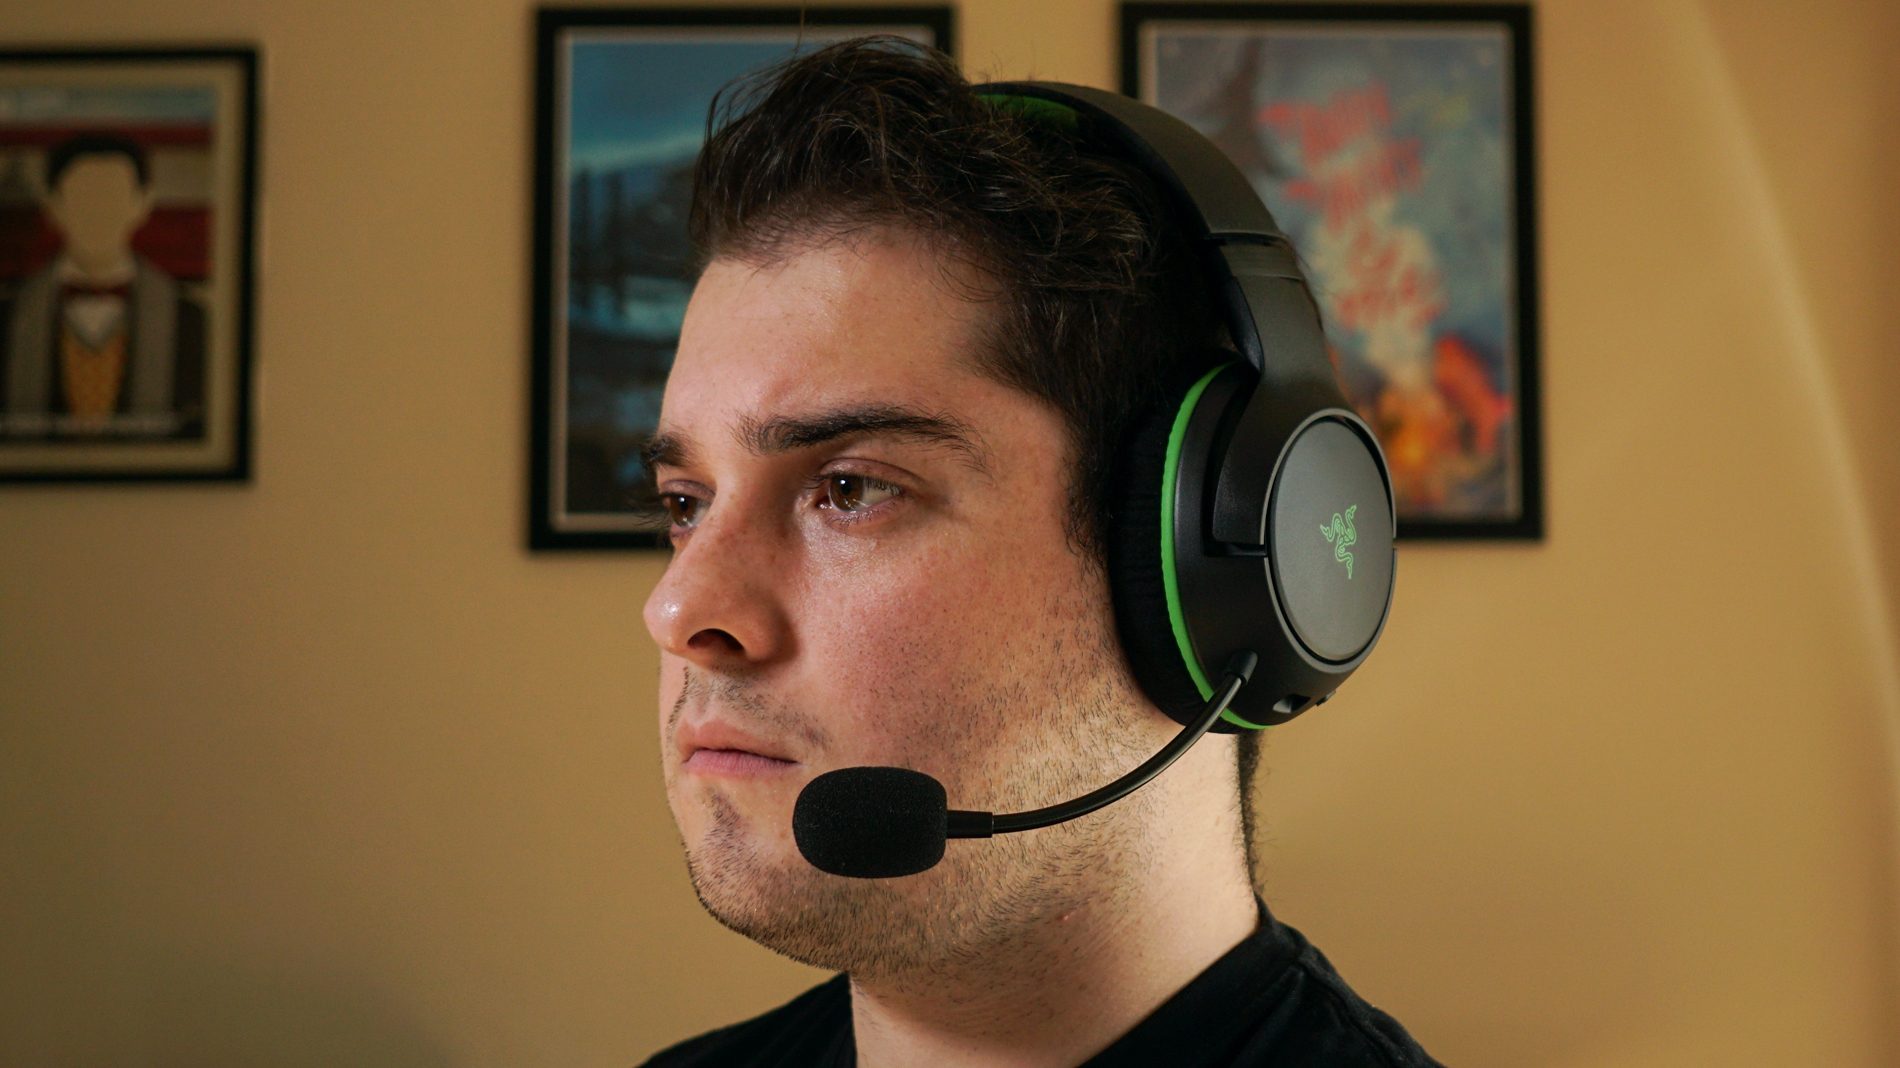 A man wears the Razer Kaira Wireless sitting at a computer, with posters for My Brother, My Brother and Me, and Canada Heritage Minutes in the background.